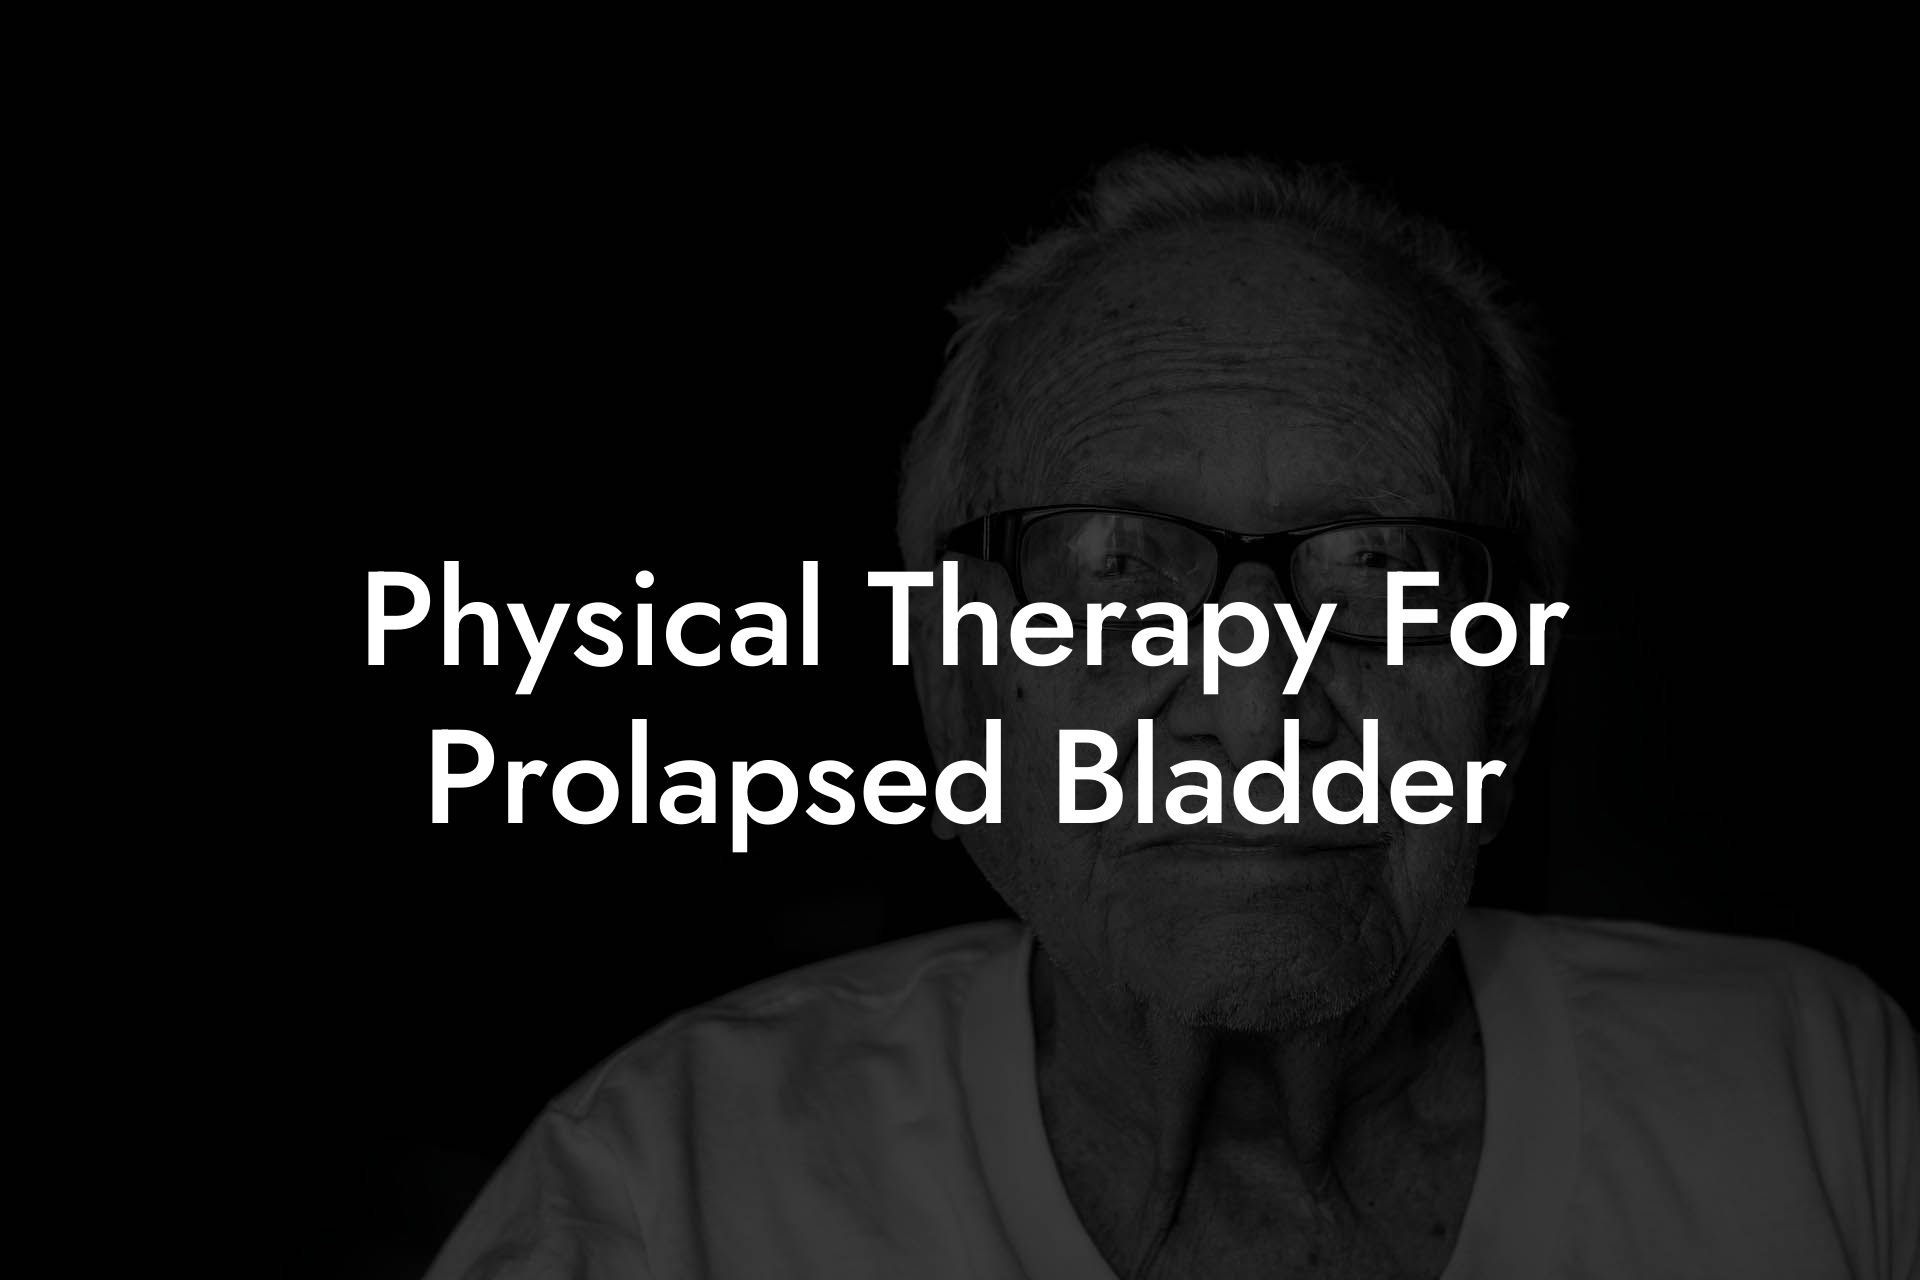 Physical Therapy For Prolapsed Bladder